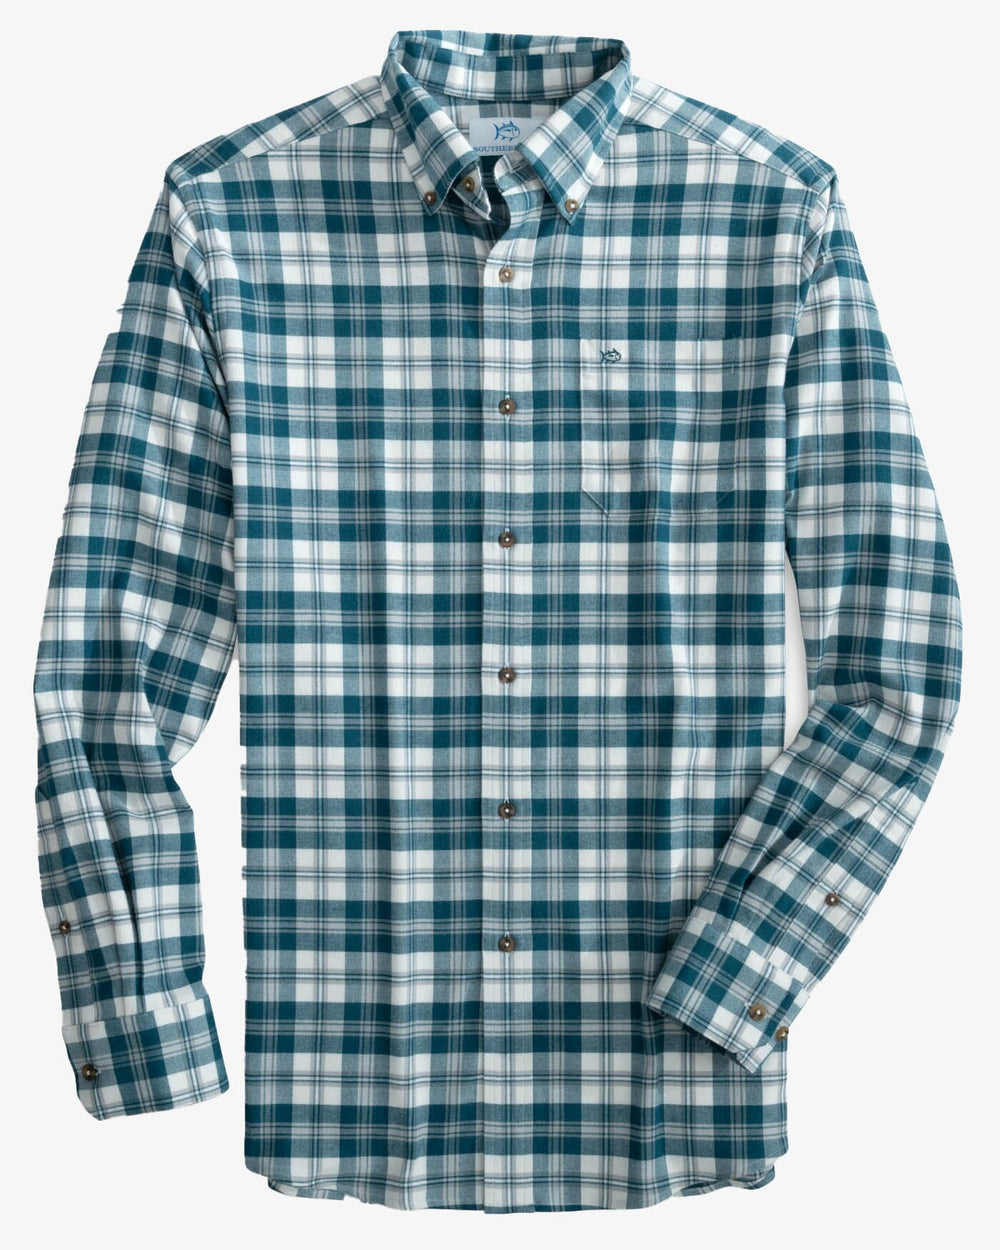 The front view of the Southern Tide Flannel Intercoastal Durant Plaid Long Sleeve Sportshirt by Southern Tide - Georgian Bay Green